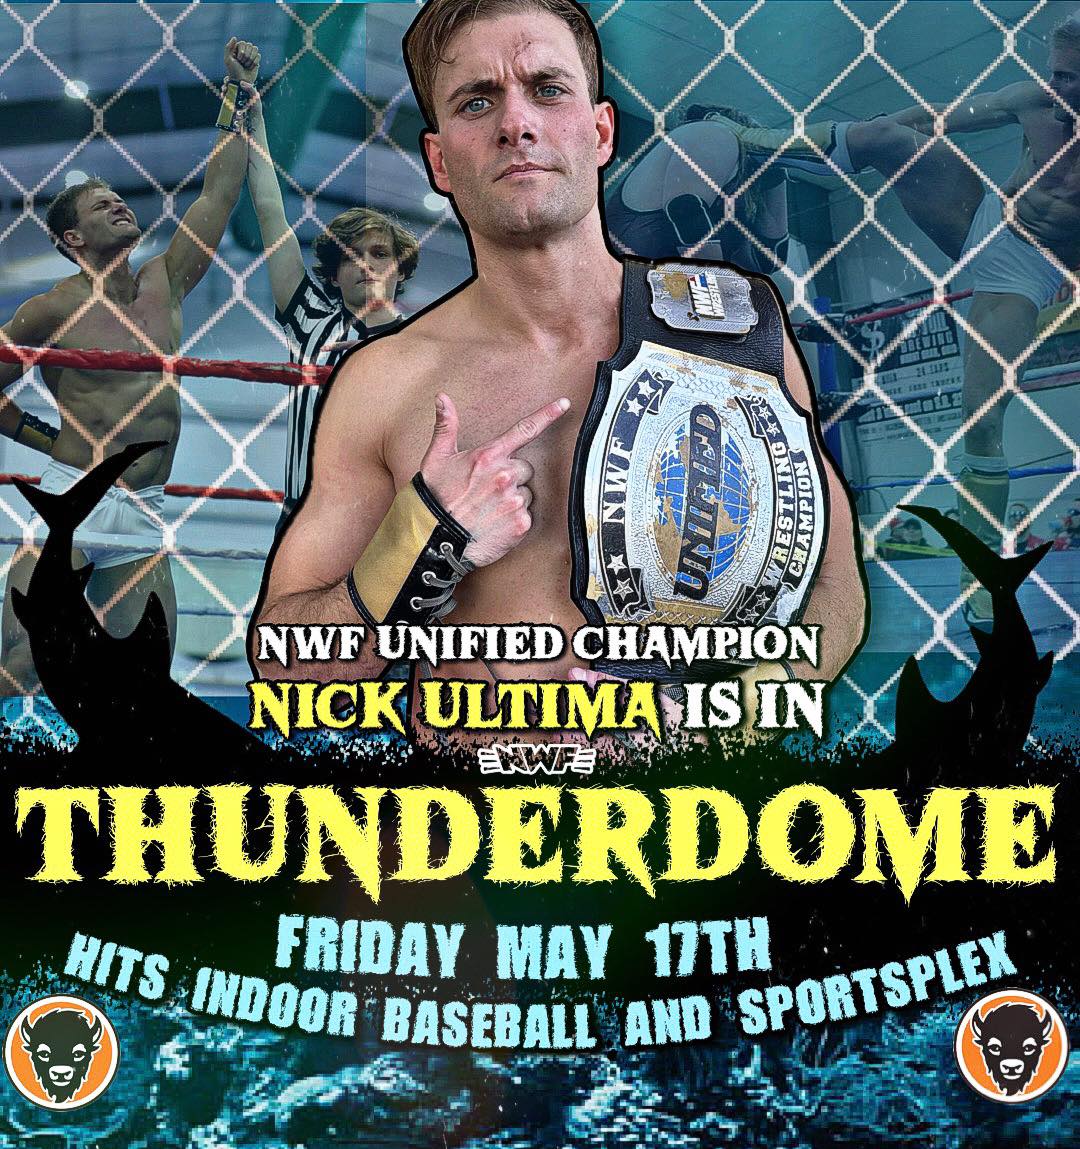 🚨 NWF UNIFIED CHAMPION NICK ULTIMA IS IN THUNDERDOME! 🚨 The 8th and final contestant for Thunderdome is none other than the NEW Unified Champion, Nick Ultima! Ultima enters his first cage match in general on May 17th at Hits! 🎟: nwfwrestling.com/events 🚪: 7 pm 🔔: 8 pm